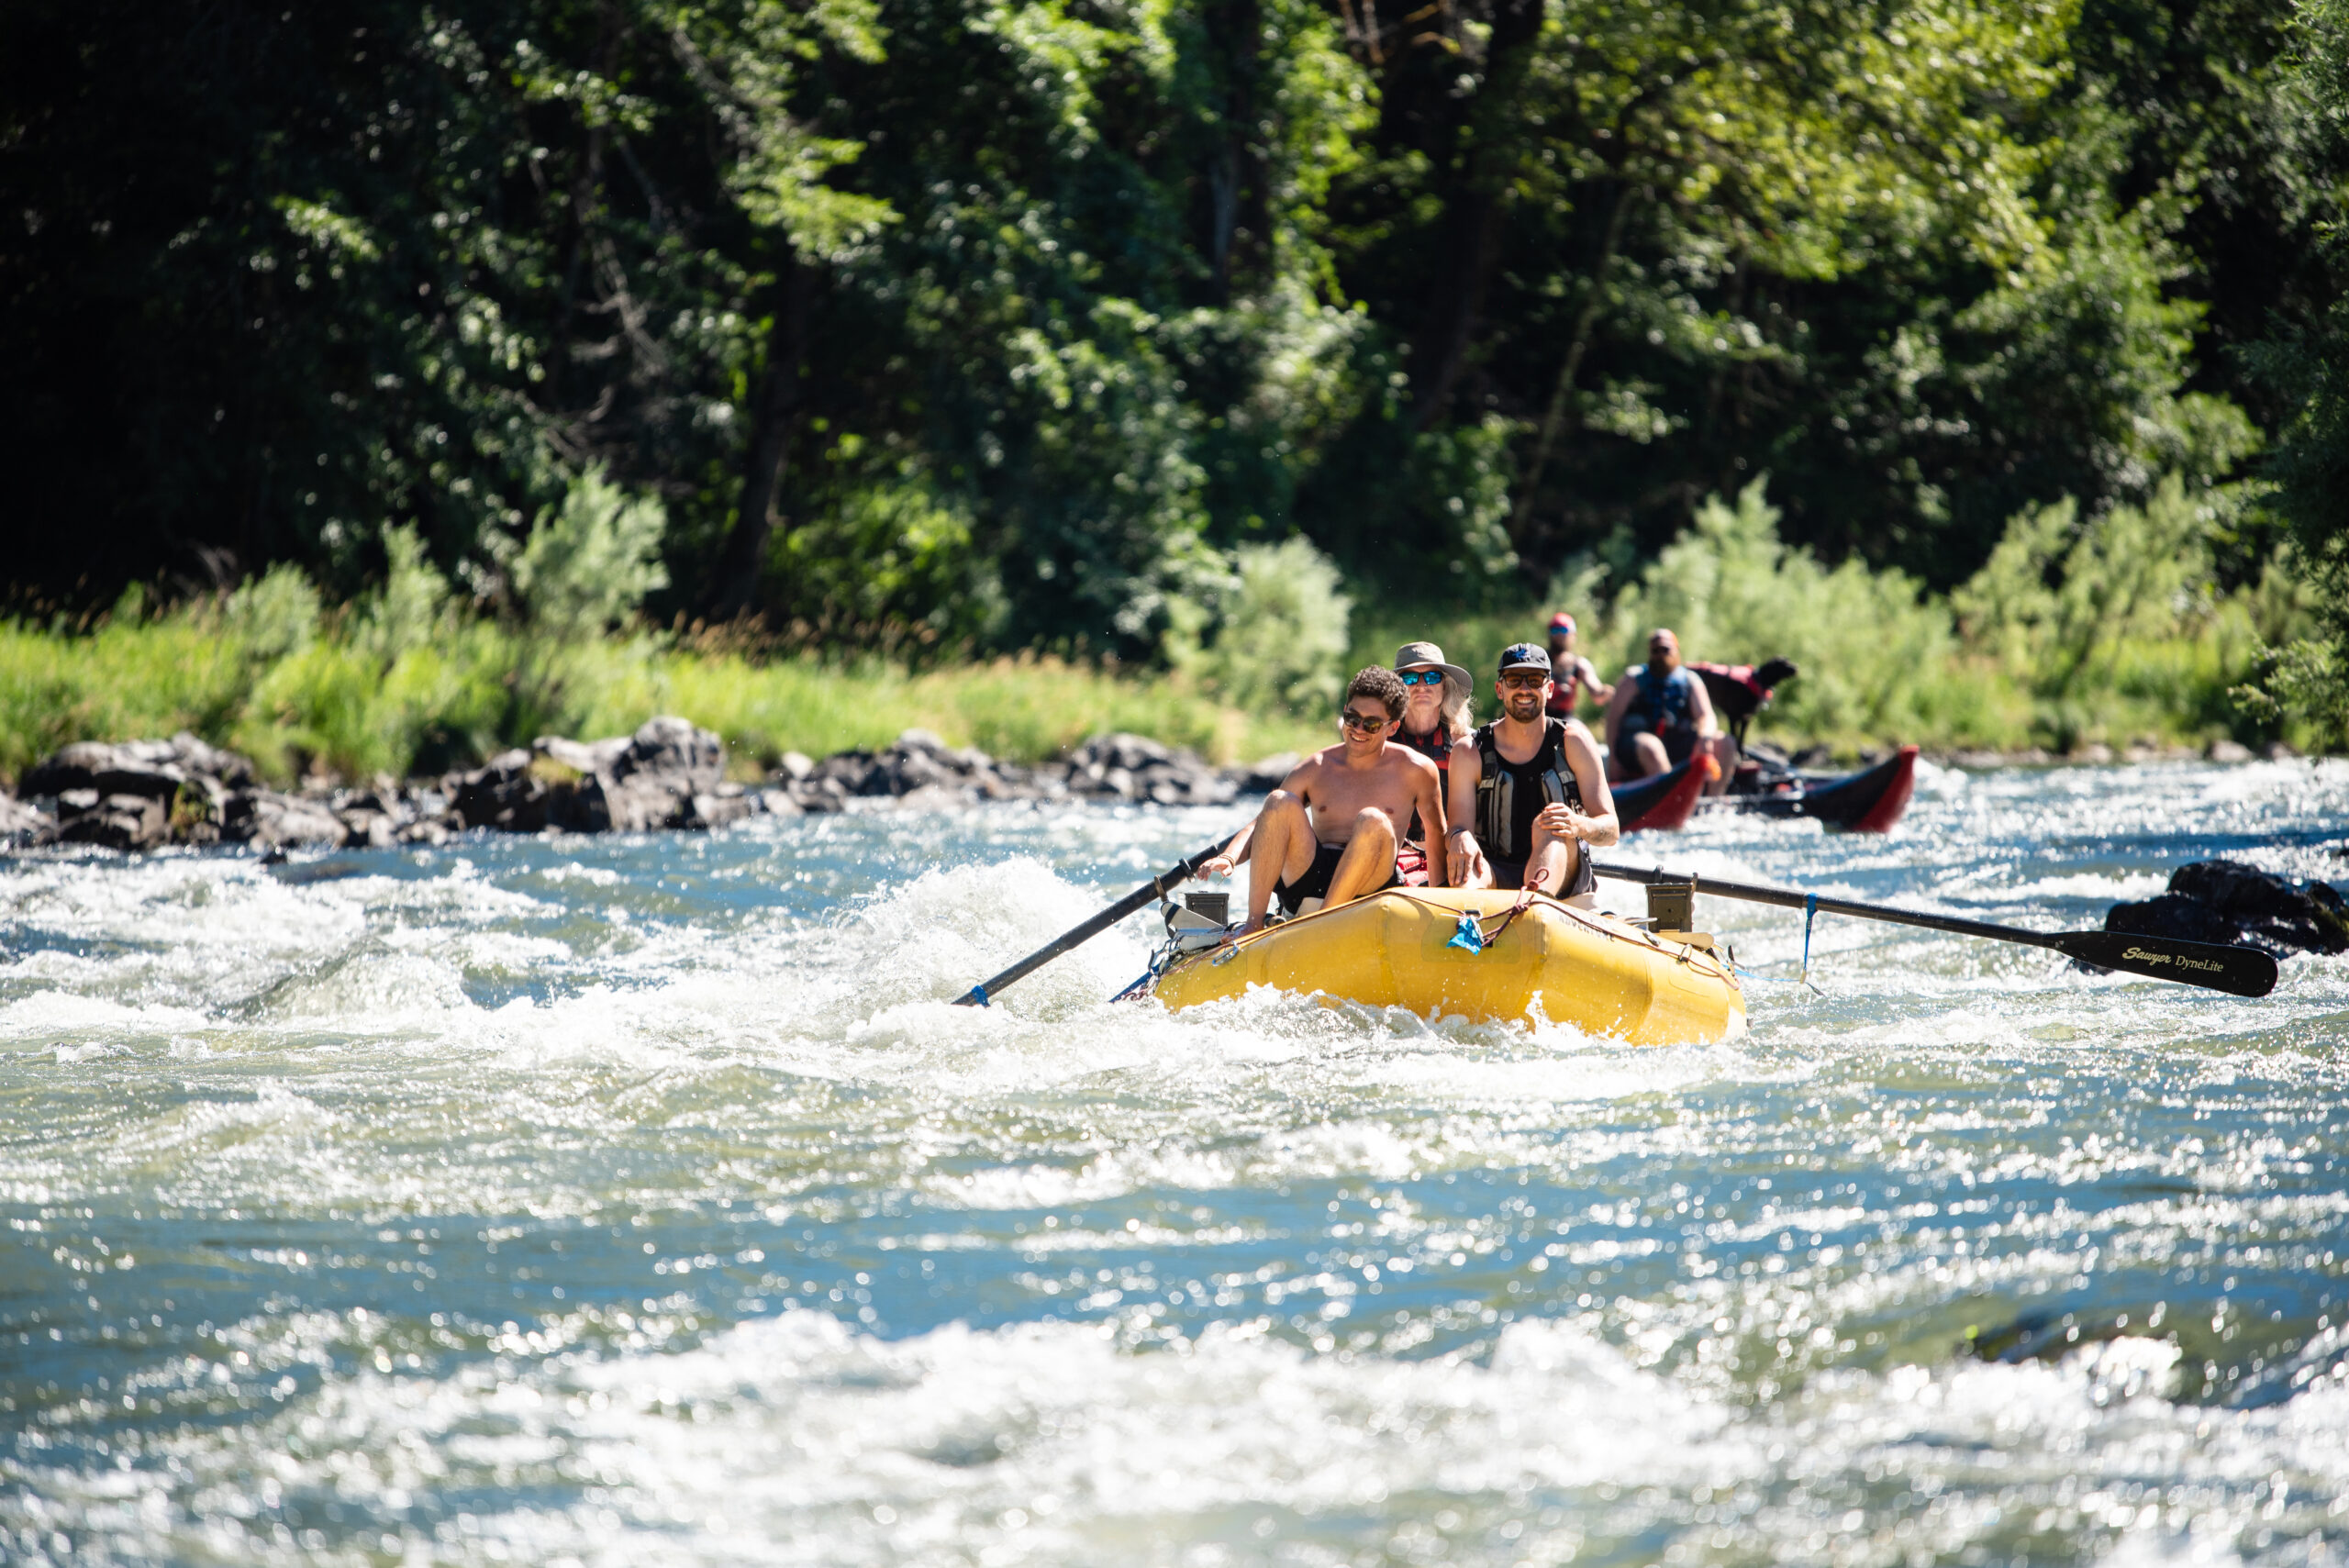 A raft is approaching rapid waters on the Rogue River, it is a small yellow raft with two paddles and three riders. In the background there is a pontoon with two people and their dog in a lifejacket.